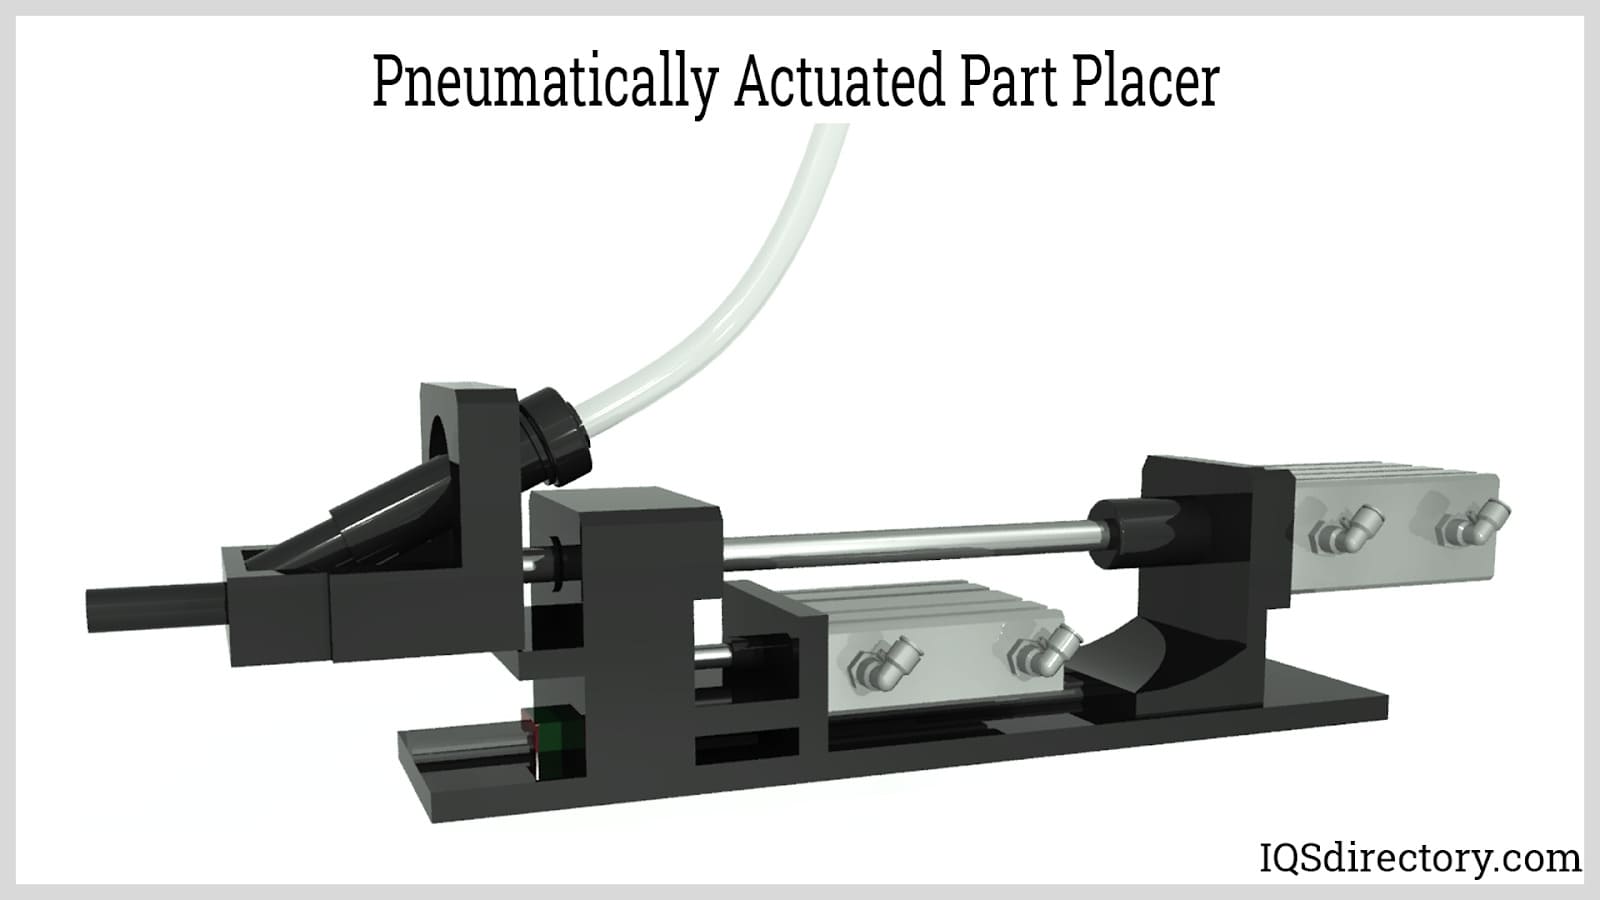 Pneumatically Actuated Part Placer